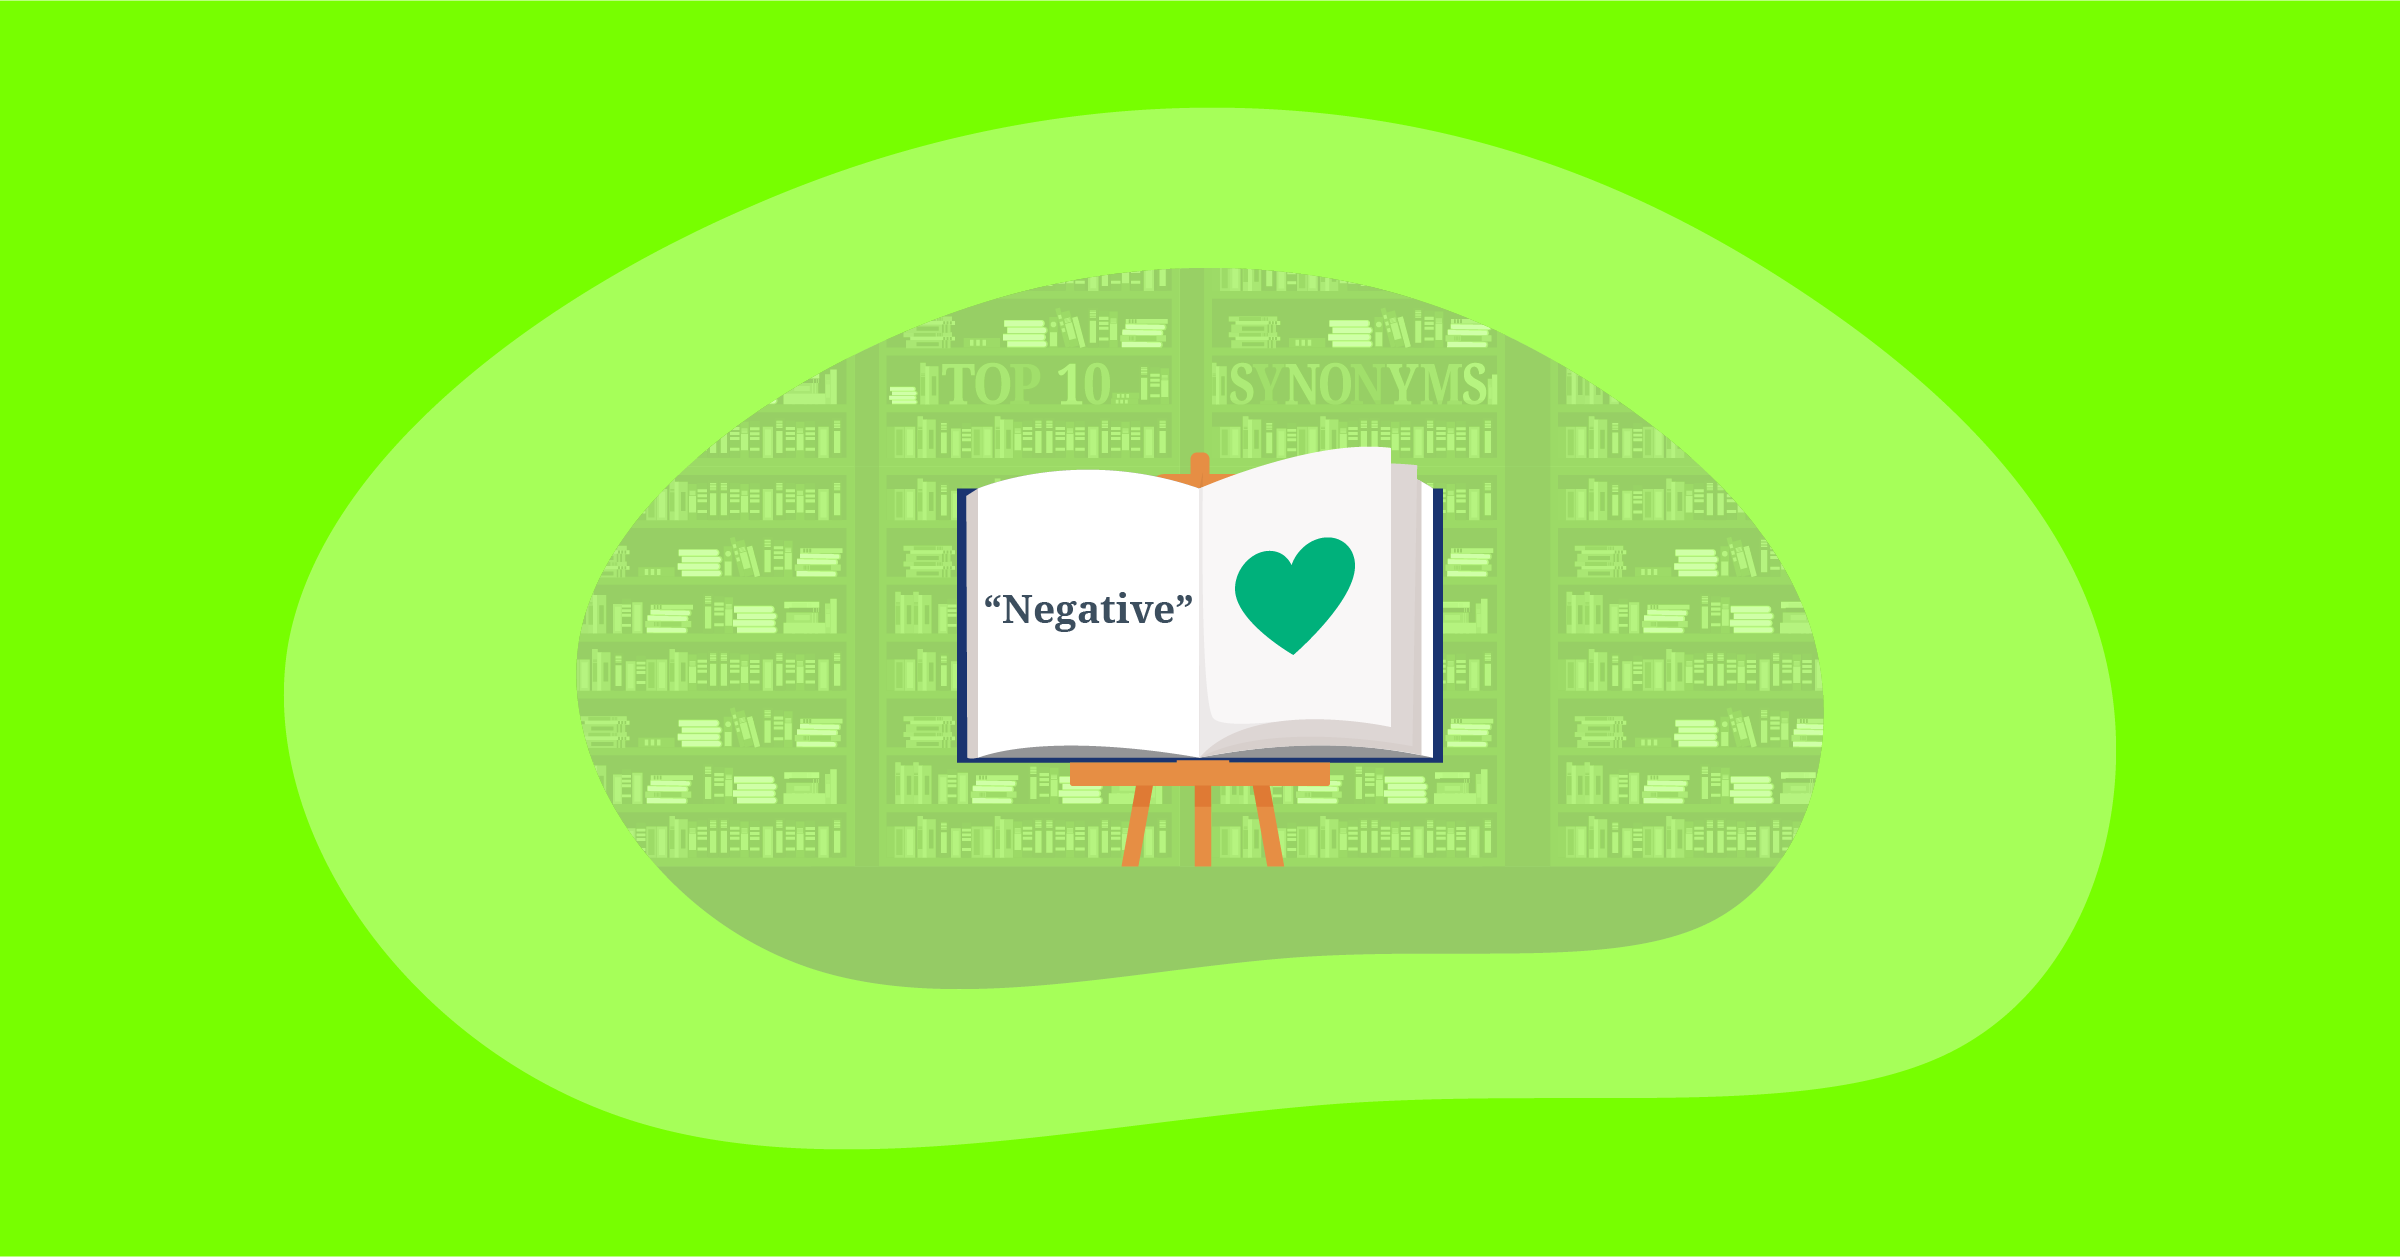 Illustration of the top 10 positive impactful synonyms for "Negative"